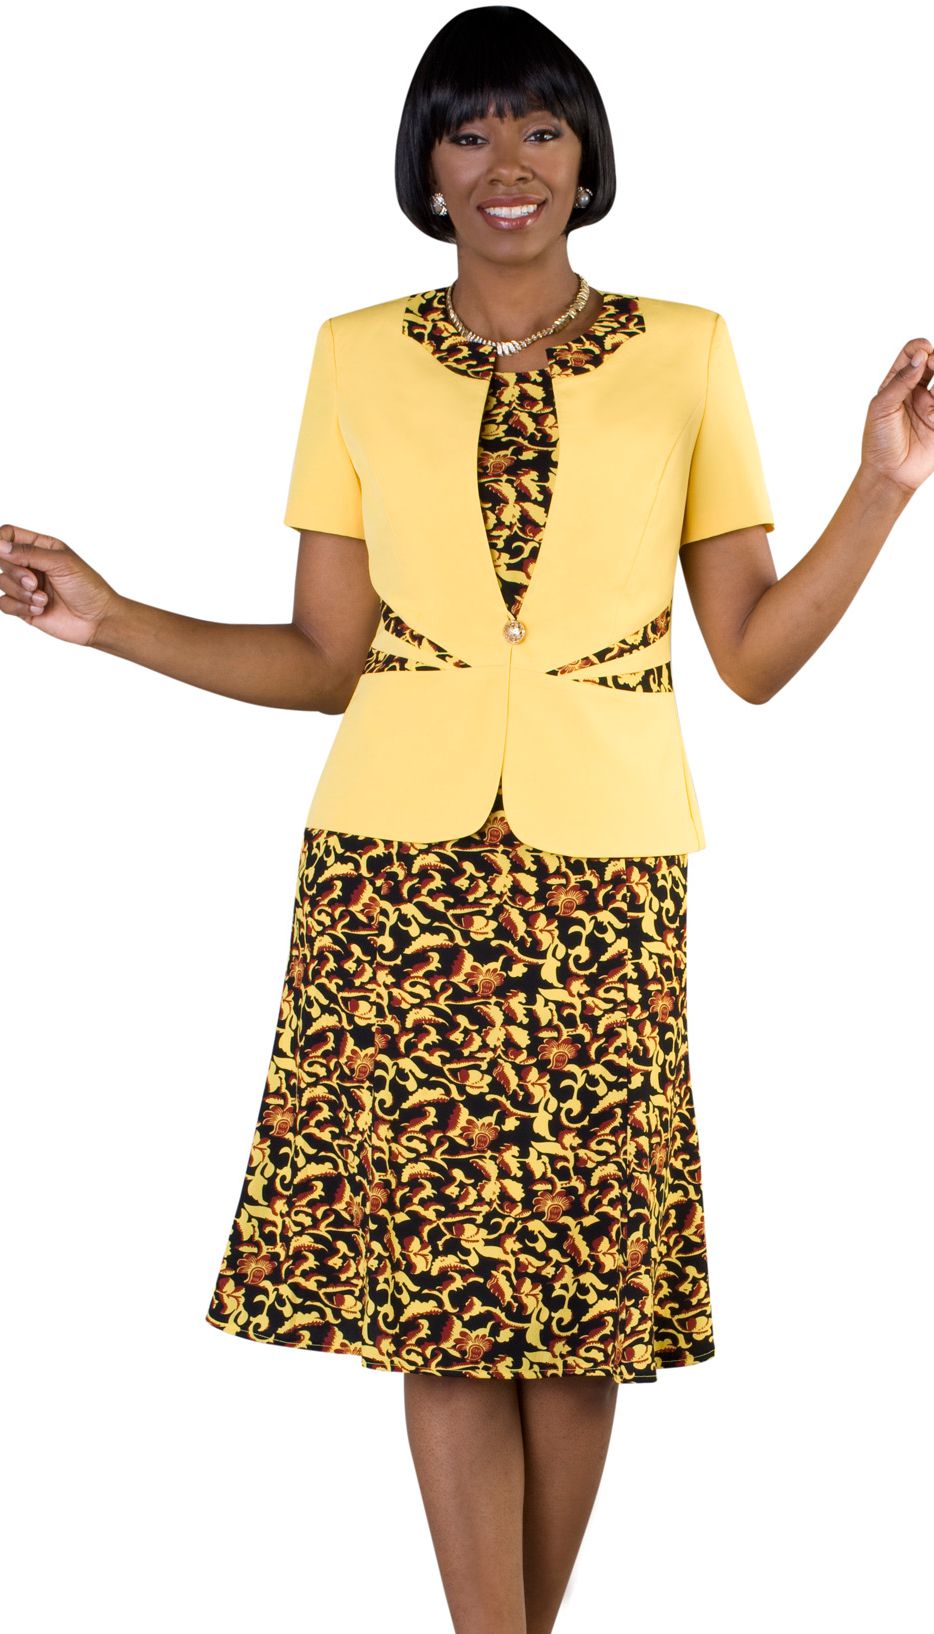 Tally Taylor Dress 9446C-Yellow Multi - Church Suits For Less